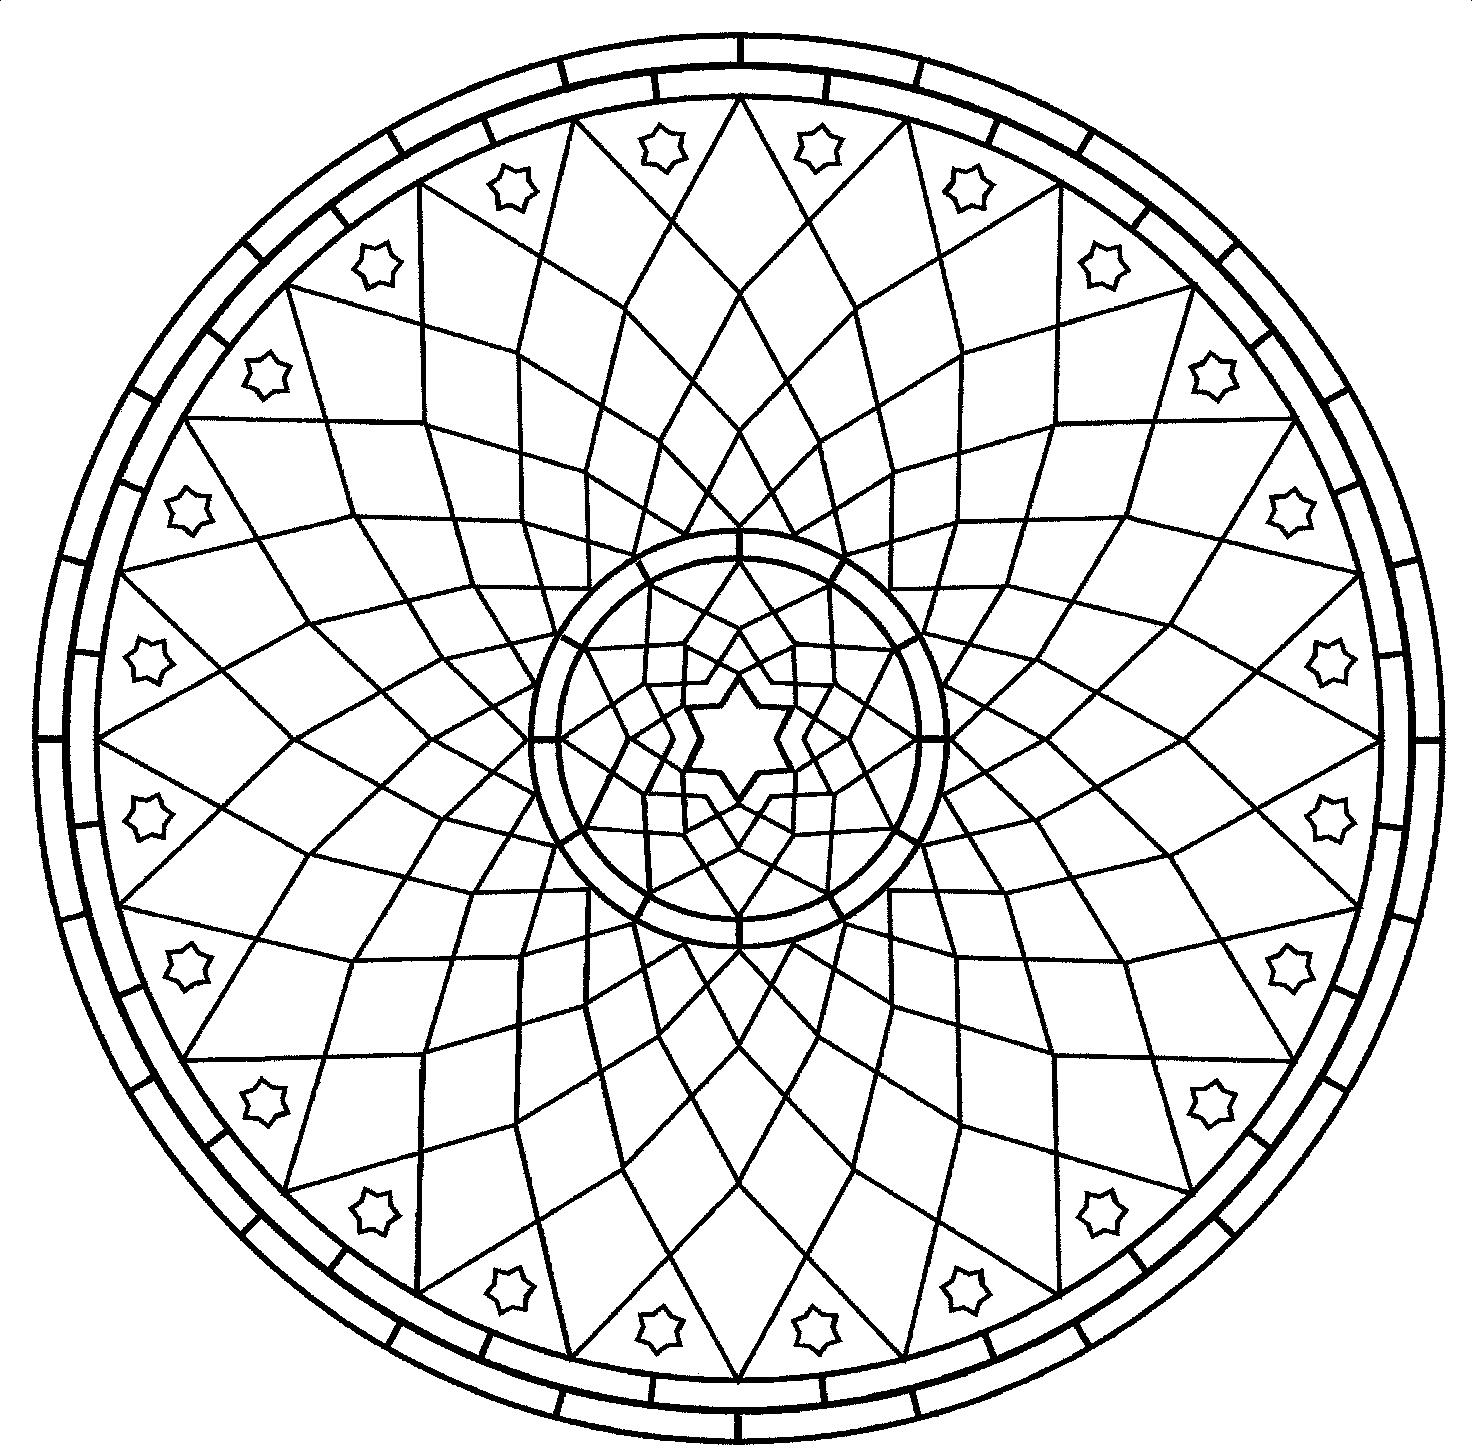 Free Coloring Pages For Adults - letscoloringpages.com - Cool circle